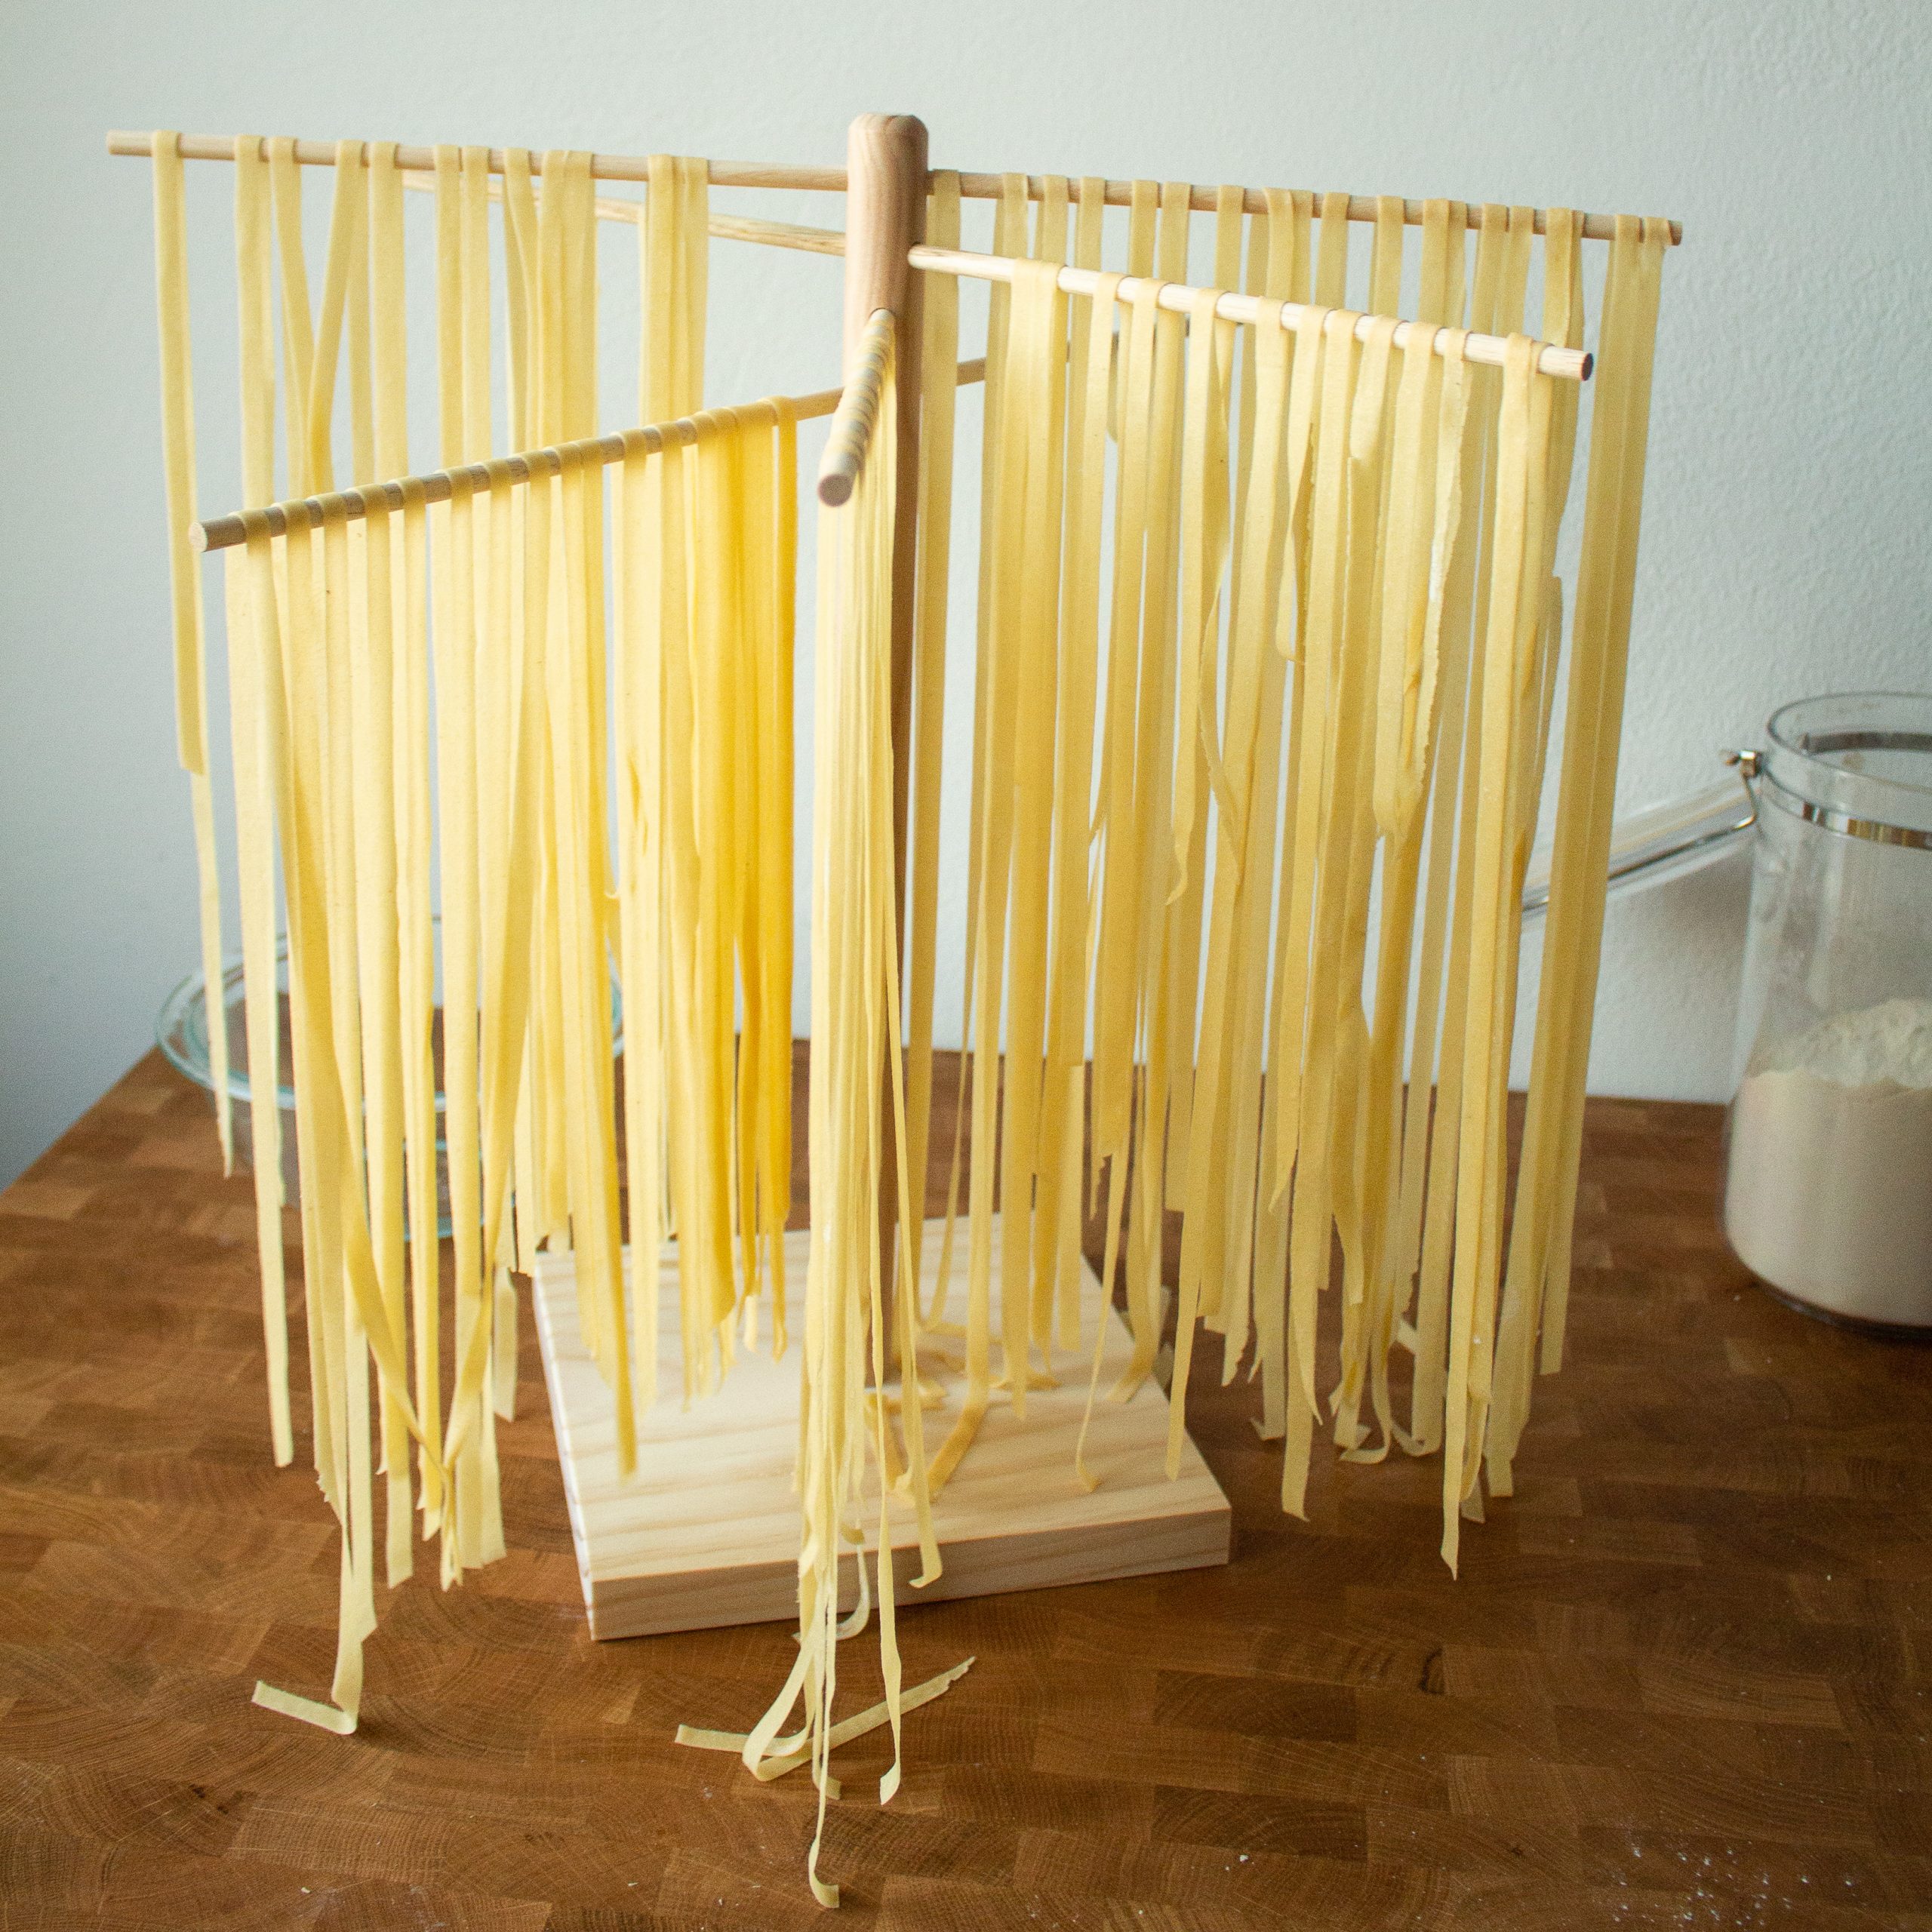 Homemade pasta is easier than you think!